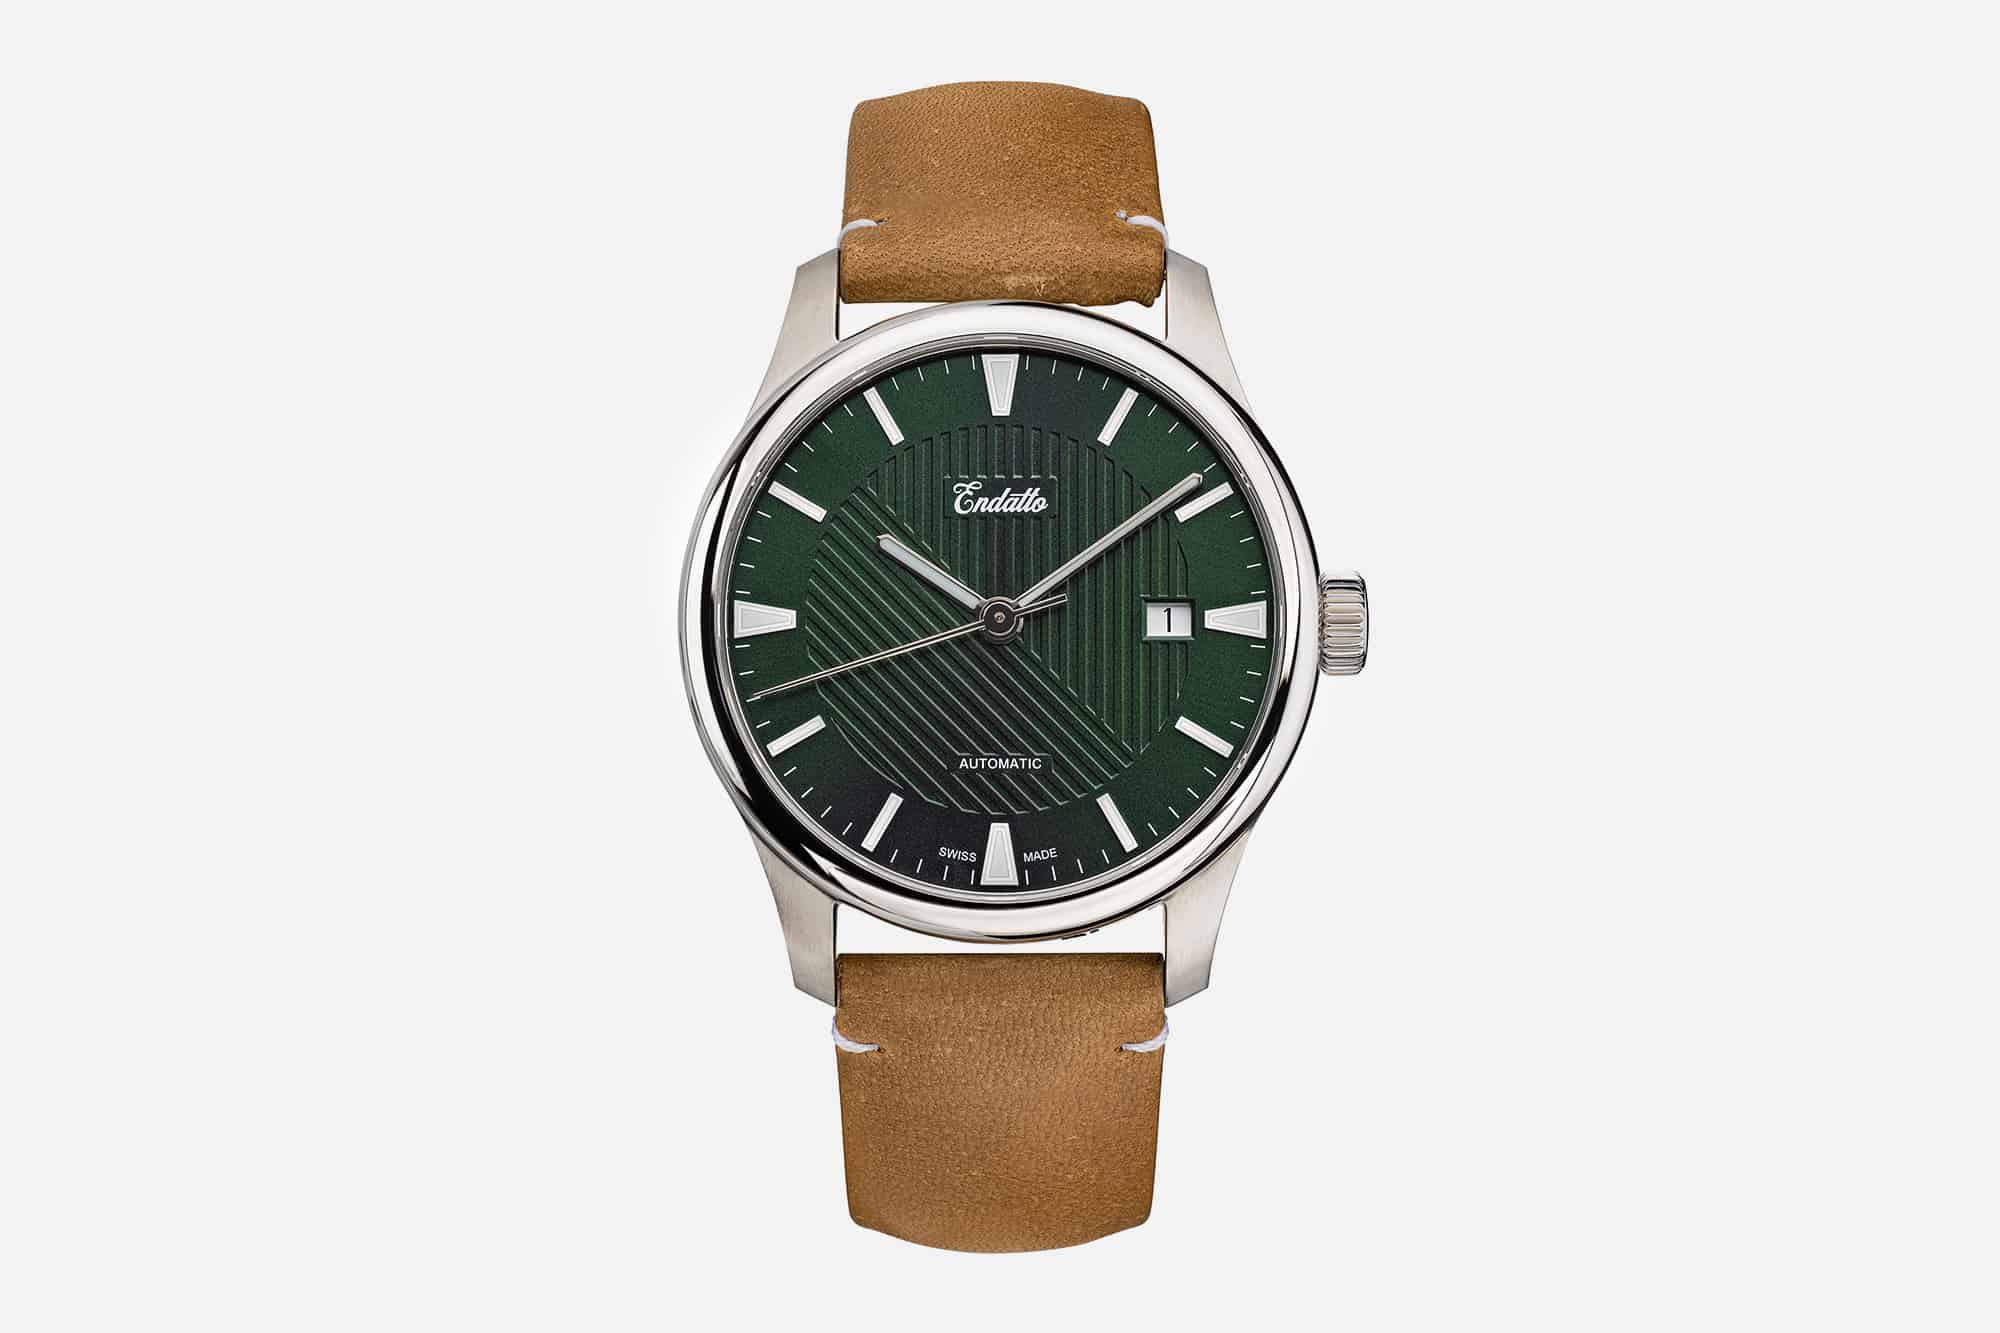 Endatto, a New Brand, Debuts Two Watches Inspired by the American Southwest